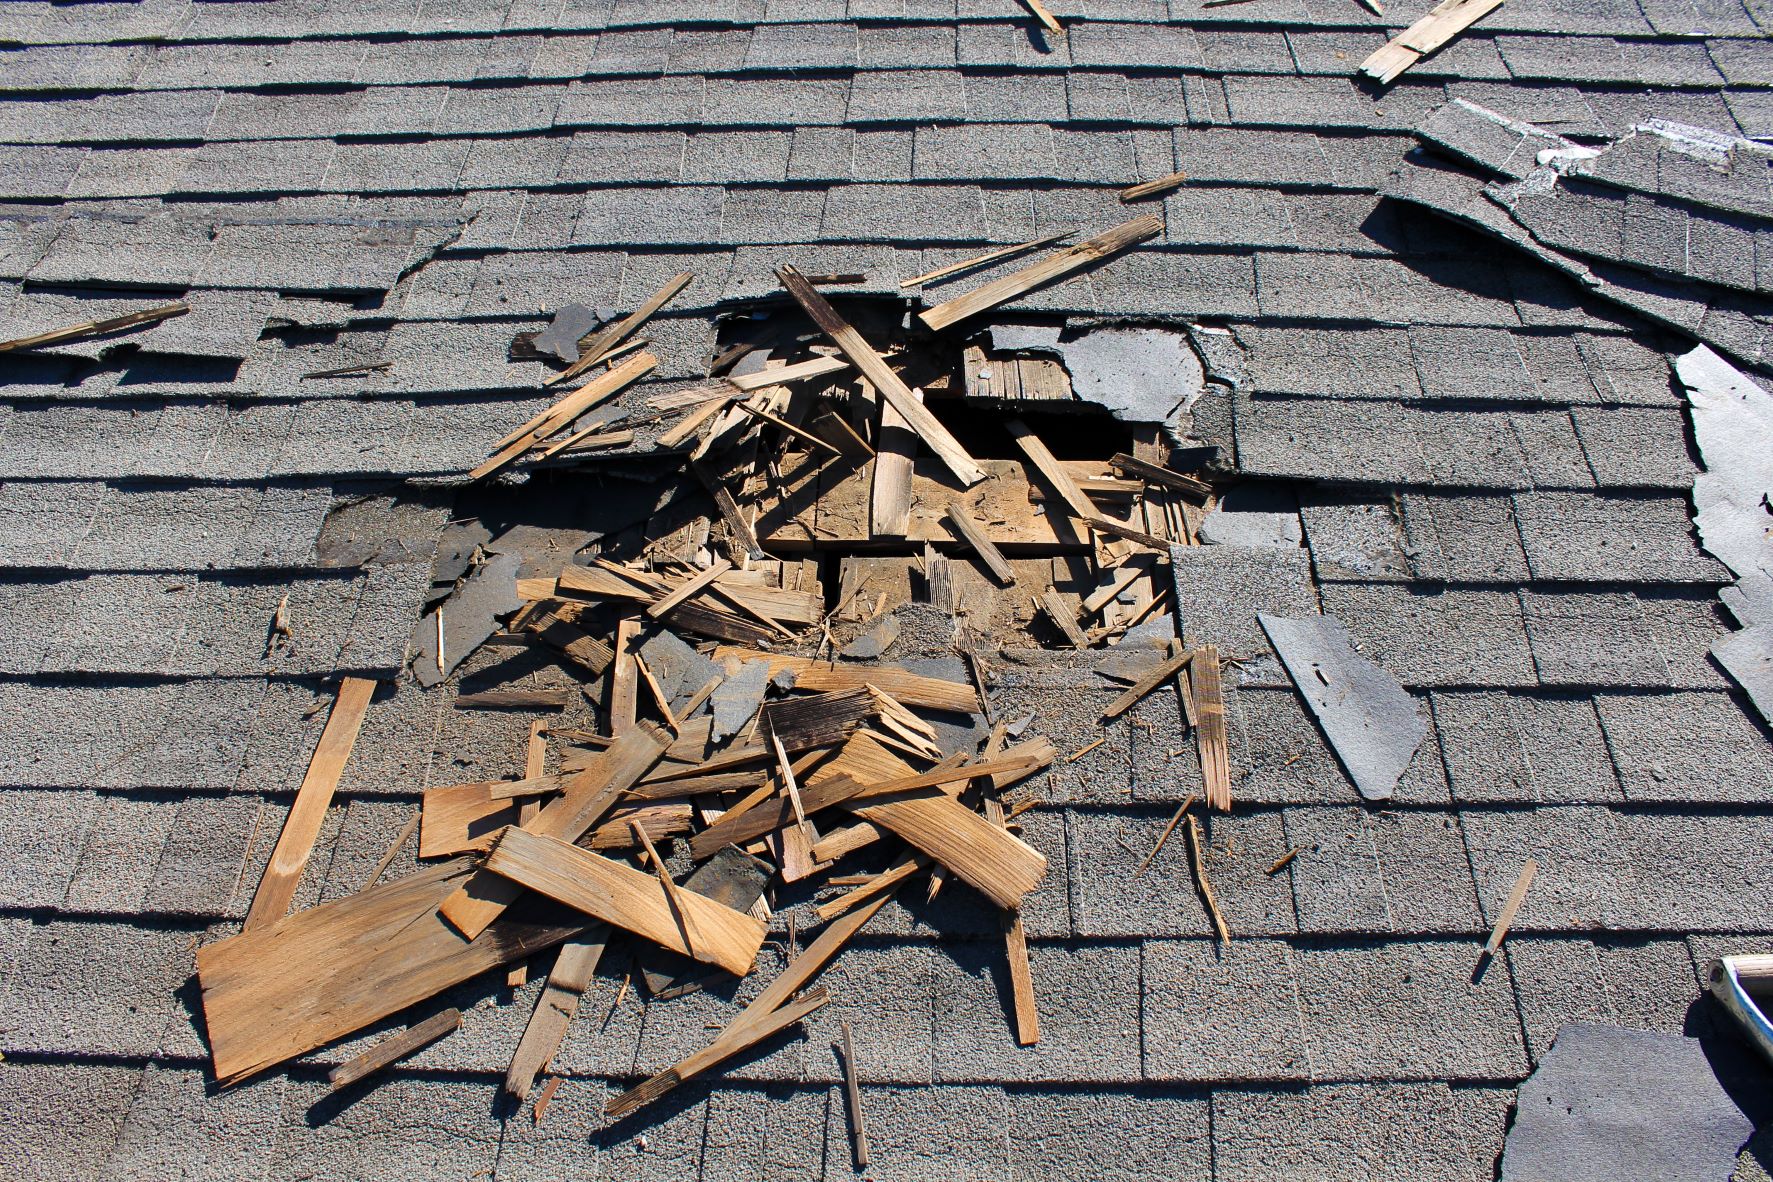 These Financing Options Can Help With Emergency Roof Repairs